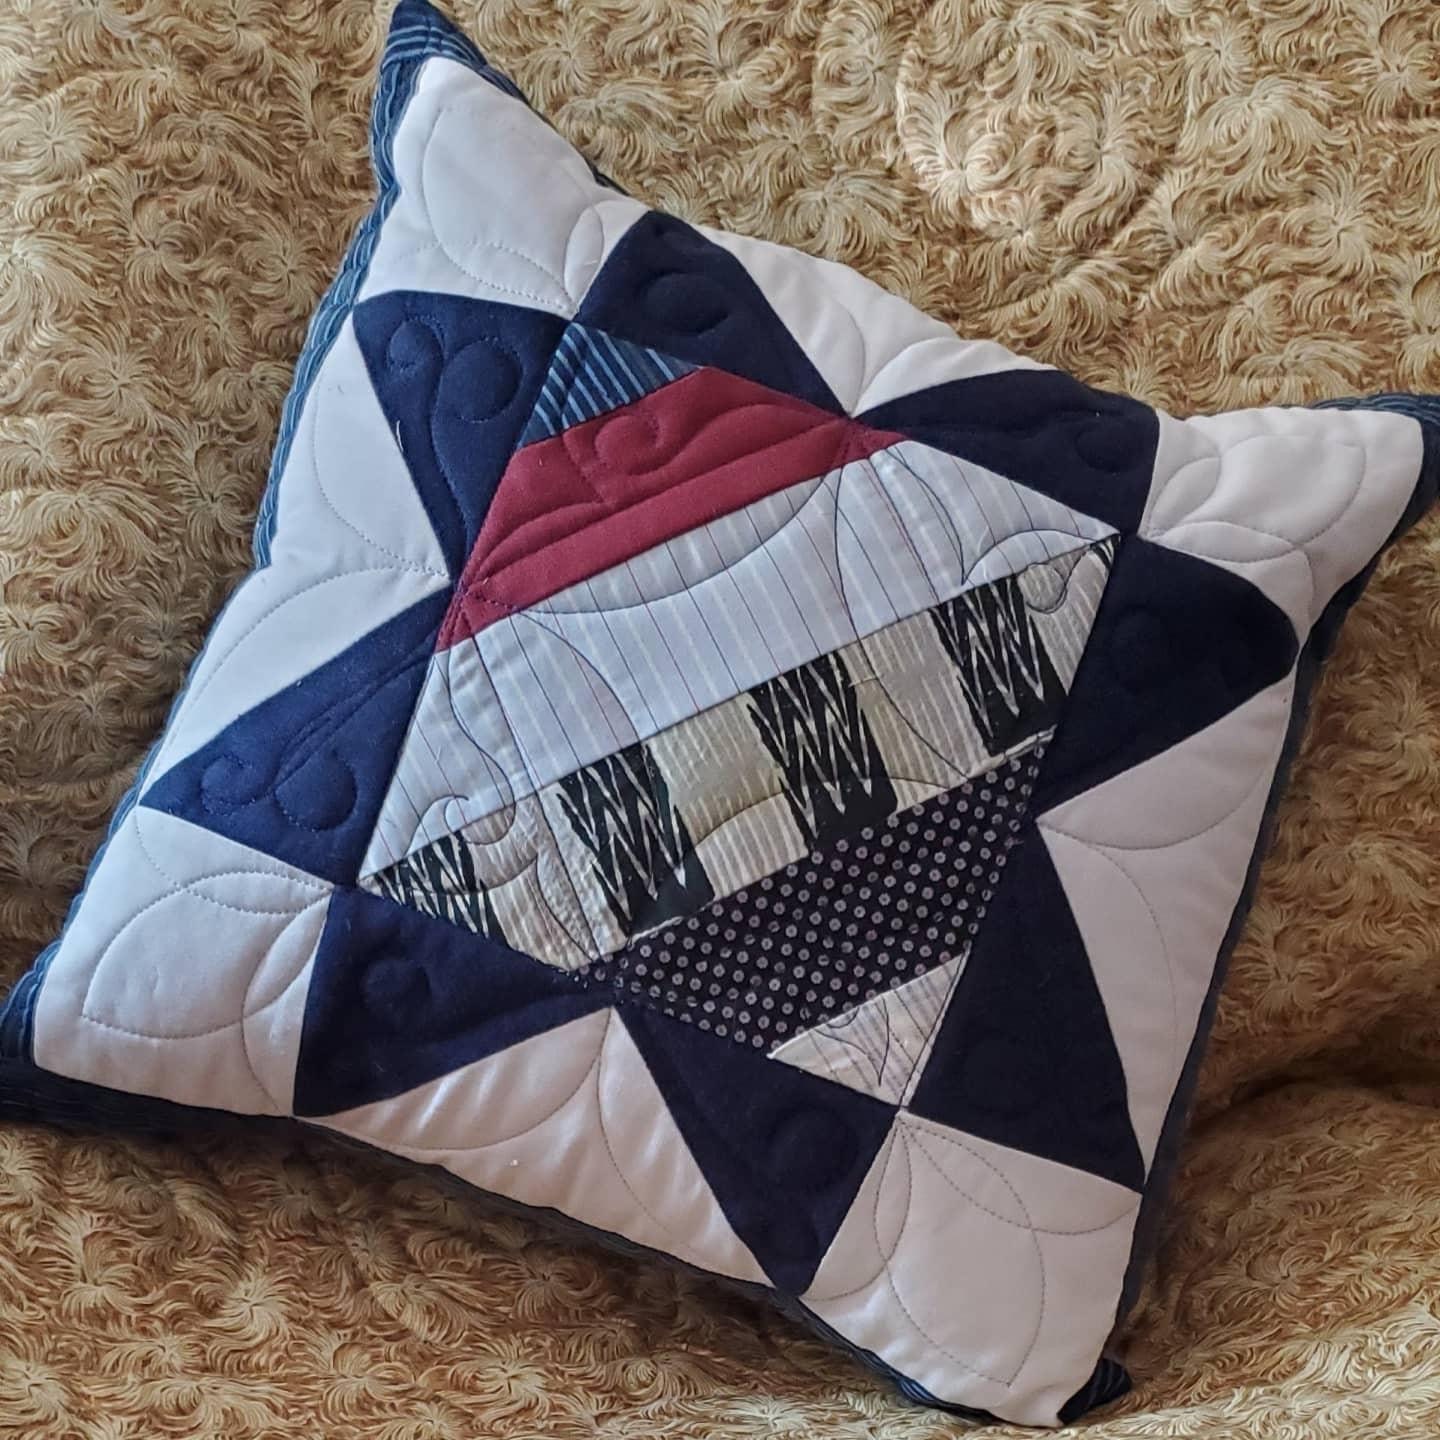 Memory Pillow Made From Ties or Garments DEPOSIT | Etsy